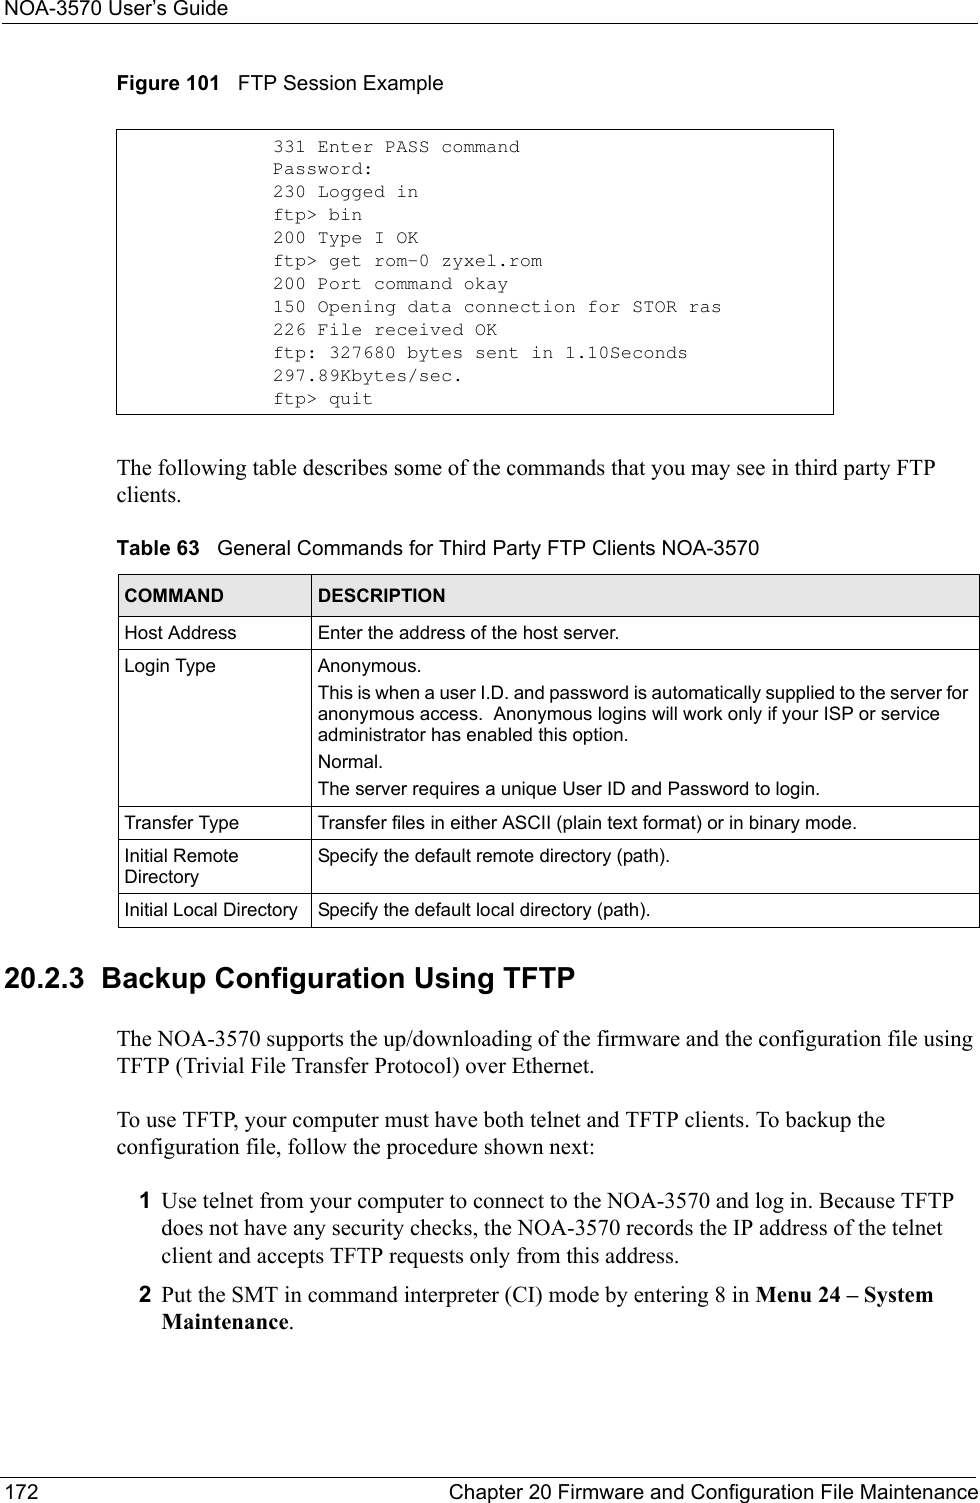 NOA-3570 User’s Guide172 Chapter 20 Firmware and Configuration File MaintenanceFigure 101   FTP Session ExampleThe following table describes some of the commands that you may see in third party FTP clients.20.2.3  Backup Configuration Using TFTPThe NOA-3570 supports the up/downloading of the firmware and the configuration file using TFTP (Trivial File Transfer Protocol) over Ethernet.To use TFTP, your computer must have both telnet and TFTP clients. To backup the configuration file, follow the procedure shown next:1Use telnet from your computer to connect to the NOA-3570 and log in. Because TFTP does not have any security checks, the NOA-3570 records the IP address of the telnet client and accepts TFTP requests only from this address.2Put the SMT in command interpreter (CI) mode by entering 8 in Menu 24 – System Maintenance.331 Enter PASS commandPassword:230 Logged inftp&gt; bin200 Type I OKftp&gt; get rom-0 zyxel.rom200 Port command okay150 Opening data connection for STOR ras226 File received OKftp: 327680 bytes sent in 1.10Seconds 297.89Kbytes/sec.ftp&gt; quitTable 63   General Commands for Third Party FTP Clients NOA-3570COMMAND DESCRIPTIONHost Address Enter the address of the host server.Login Type Anonymous. This is when a user I.D. and password is automatically supplied to the server for anonymous access.  Anonymous logins will work only if your ISP or service administrator has enabled this option.Normal.  The server requires a unique User ID and Password to login.Transfer Type Transfer files in either ASCII (plain text format) or in binary mode.Initial Remote DirectorySpecify the default remote directory (path).Initial Local Directory Specify the default local directory (path).